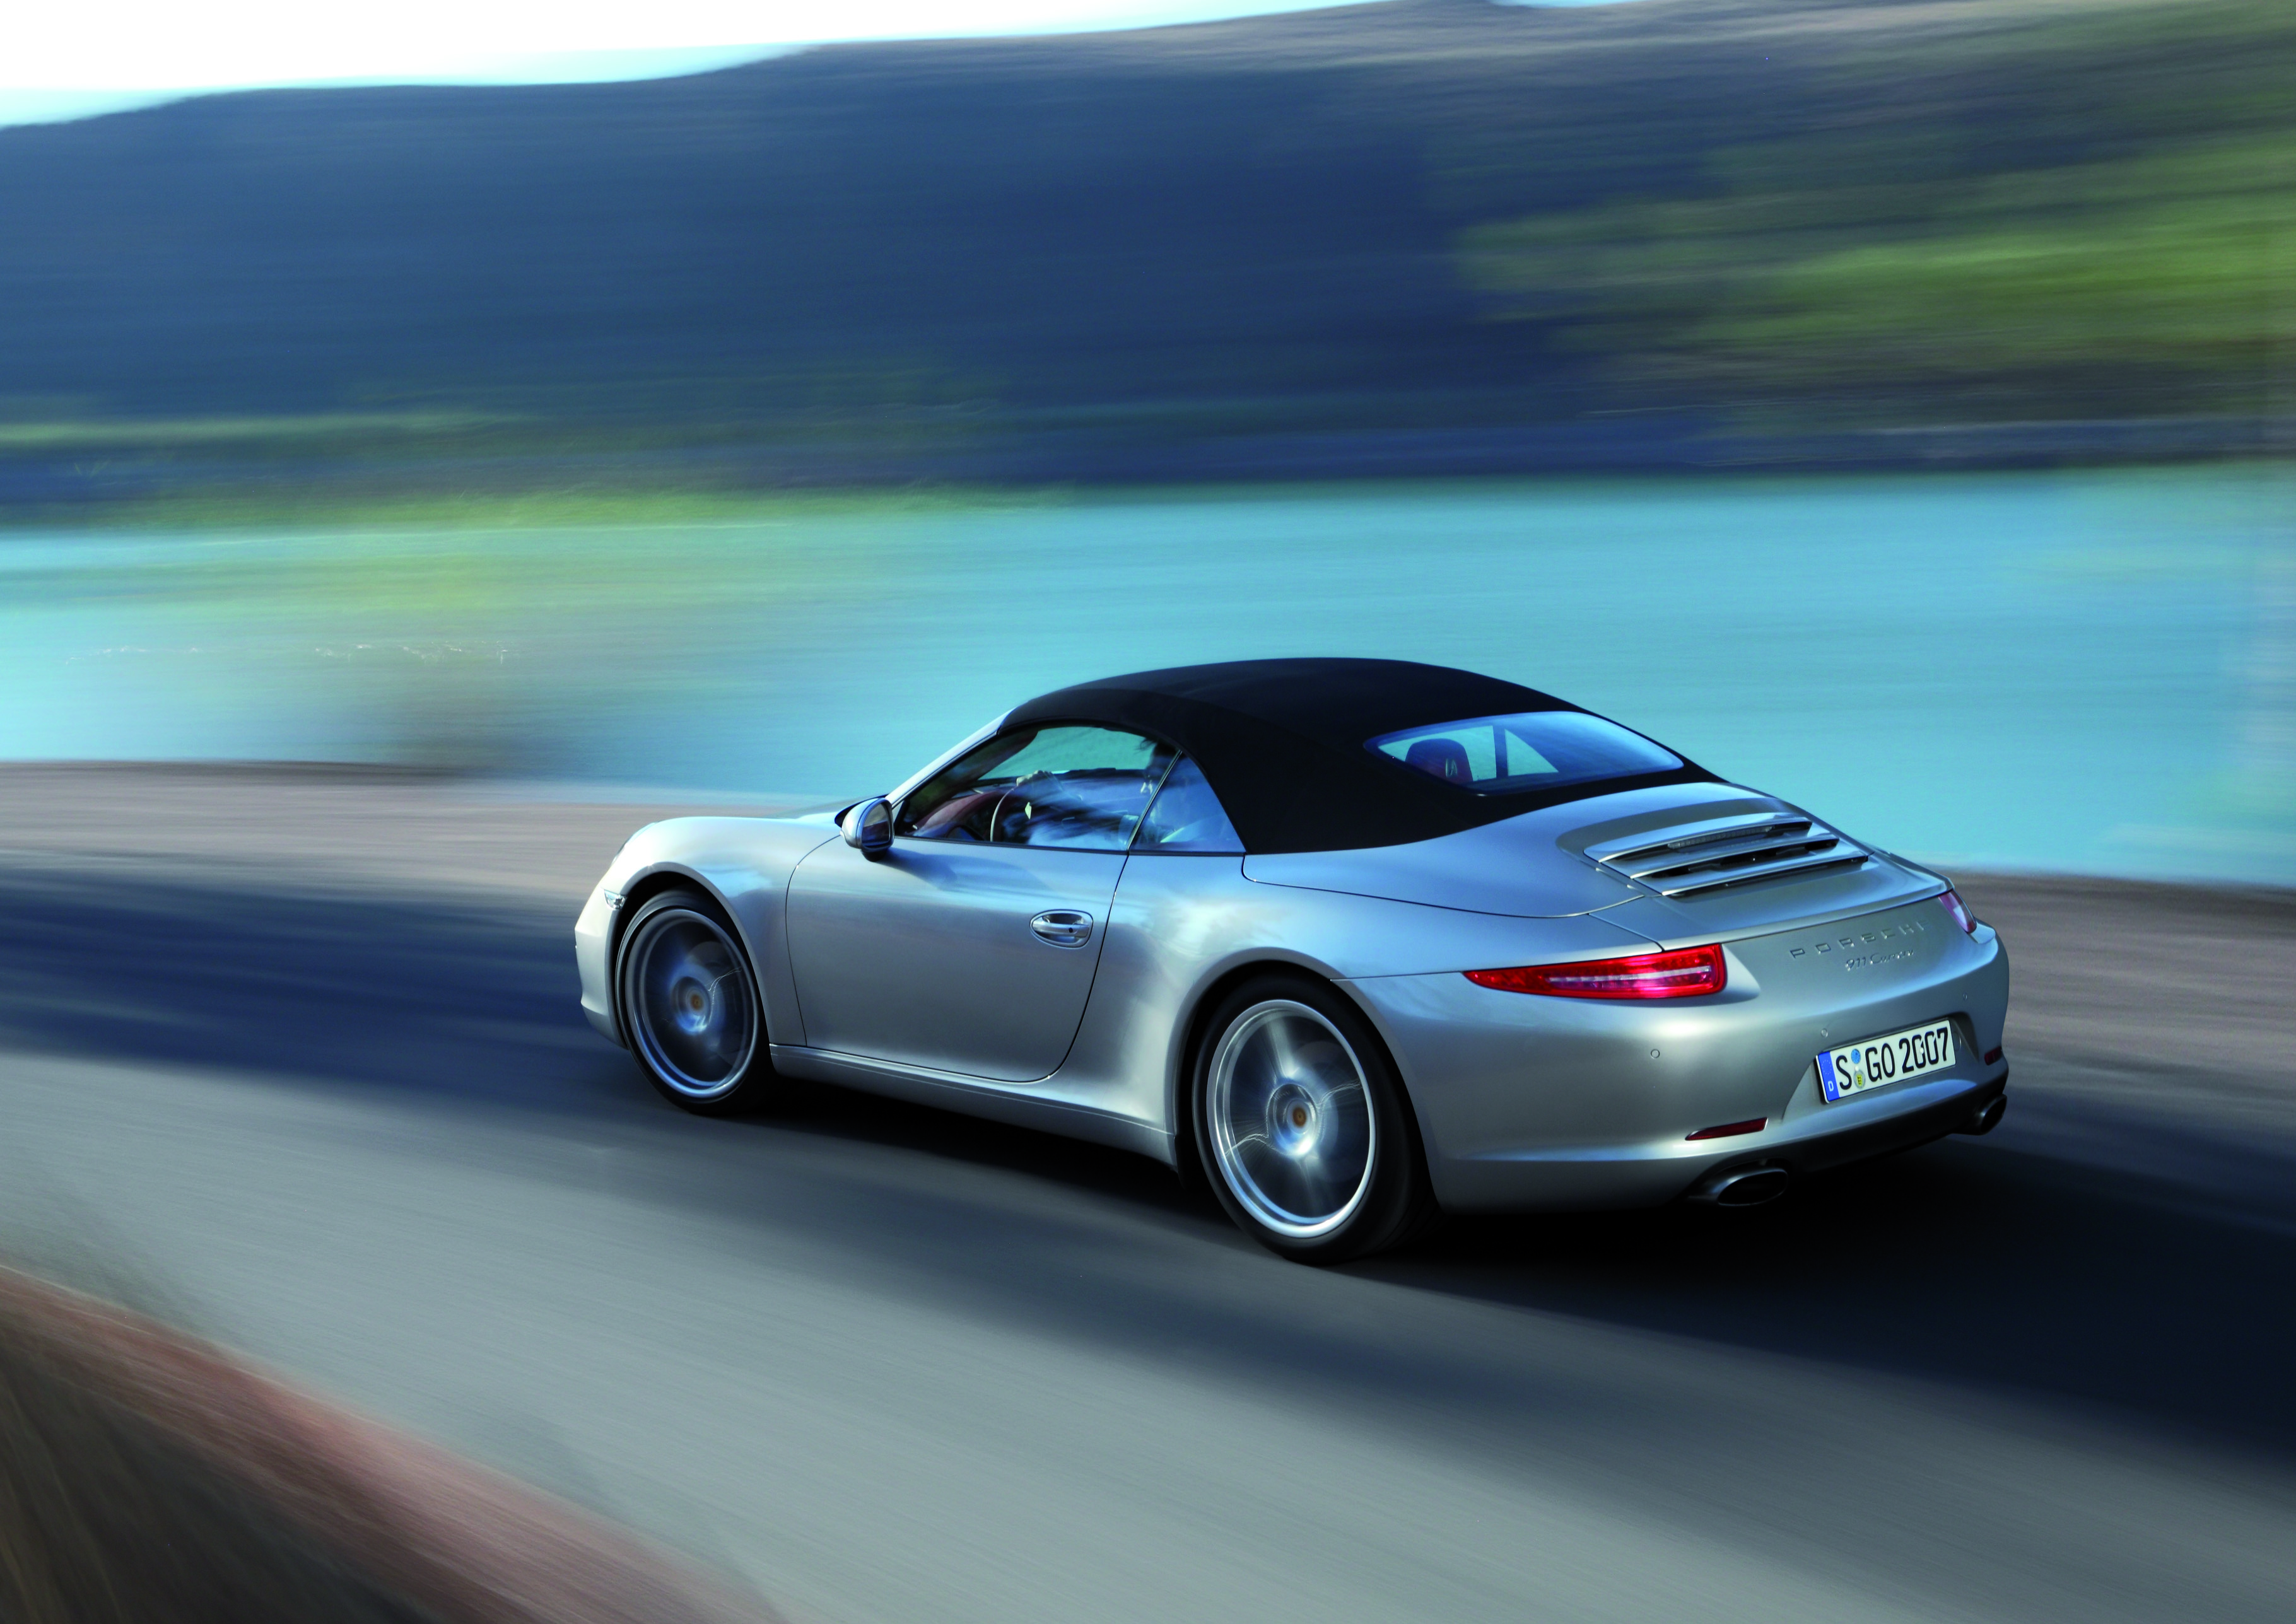 2012 All New Porsche 911 991 not 998 Model Official picture Carrera Cabriolet Simple Basic